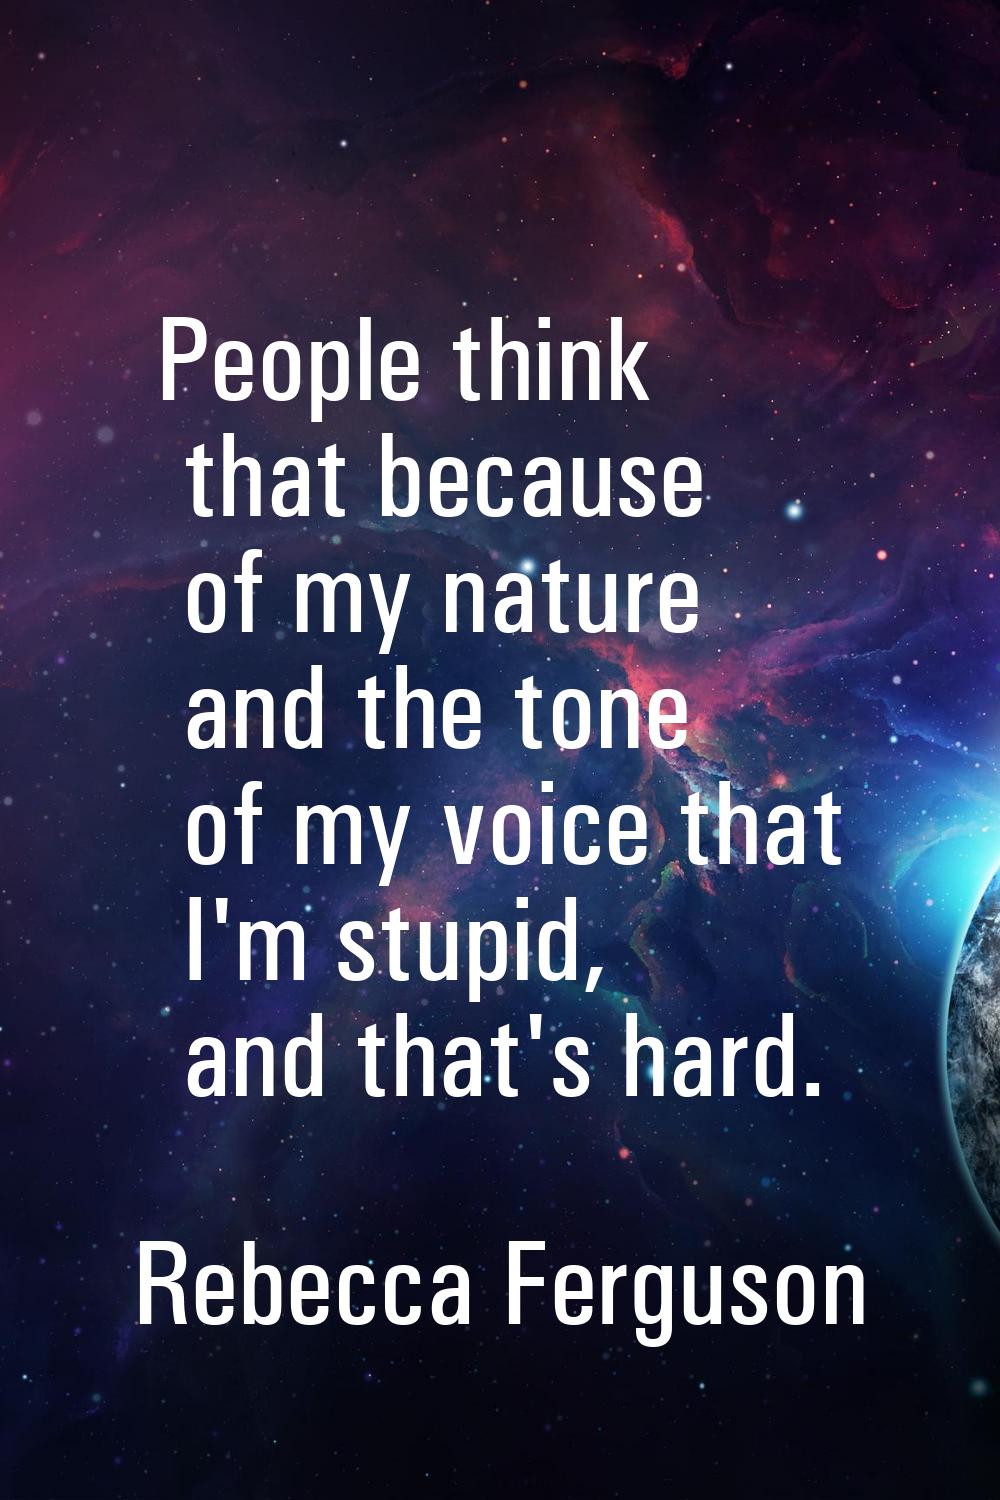 People think that because of my nature and the tone of my voice that I'm stupid, and that's hard.